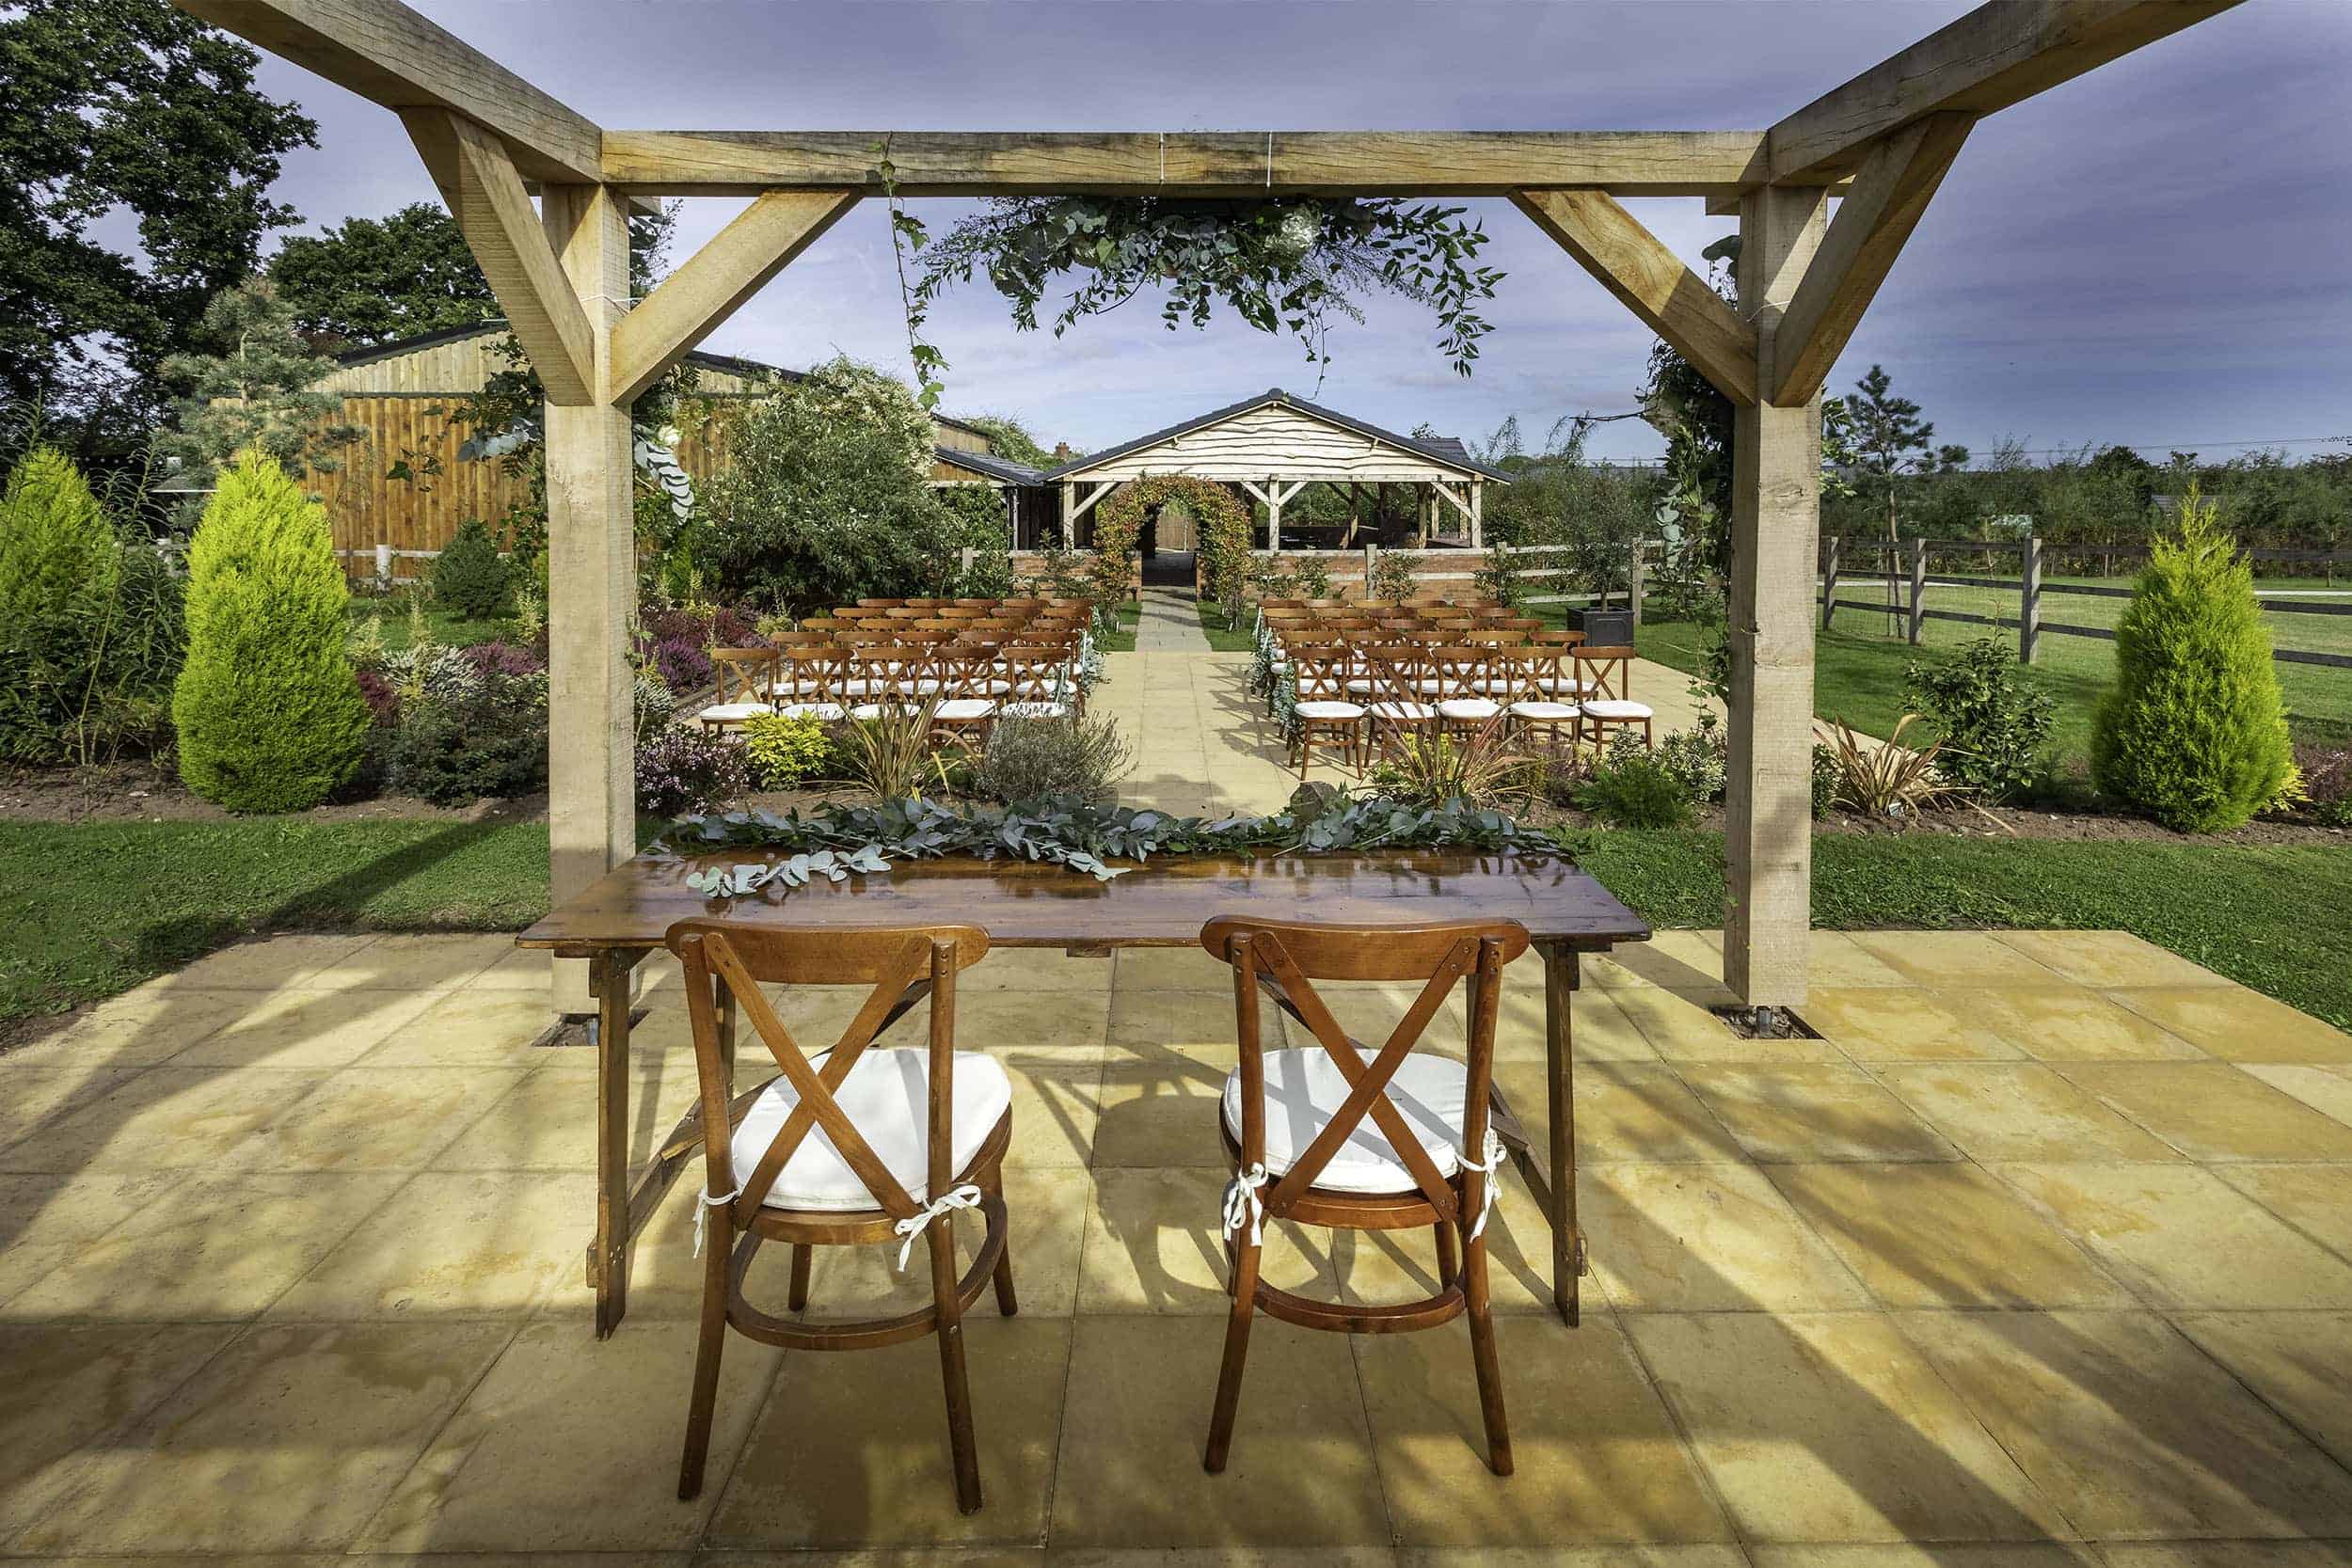 Carefully positioned on a raised area of the lawn, guests will have the perfect view of the bride or groom at the Pergola